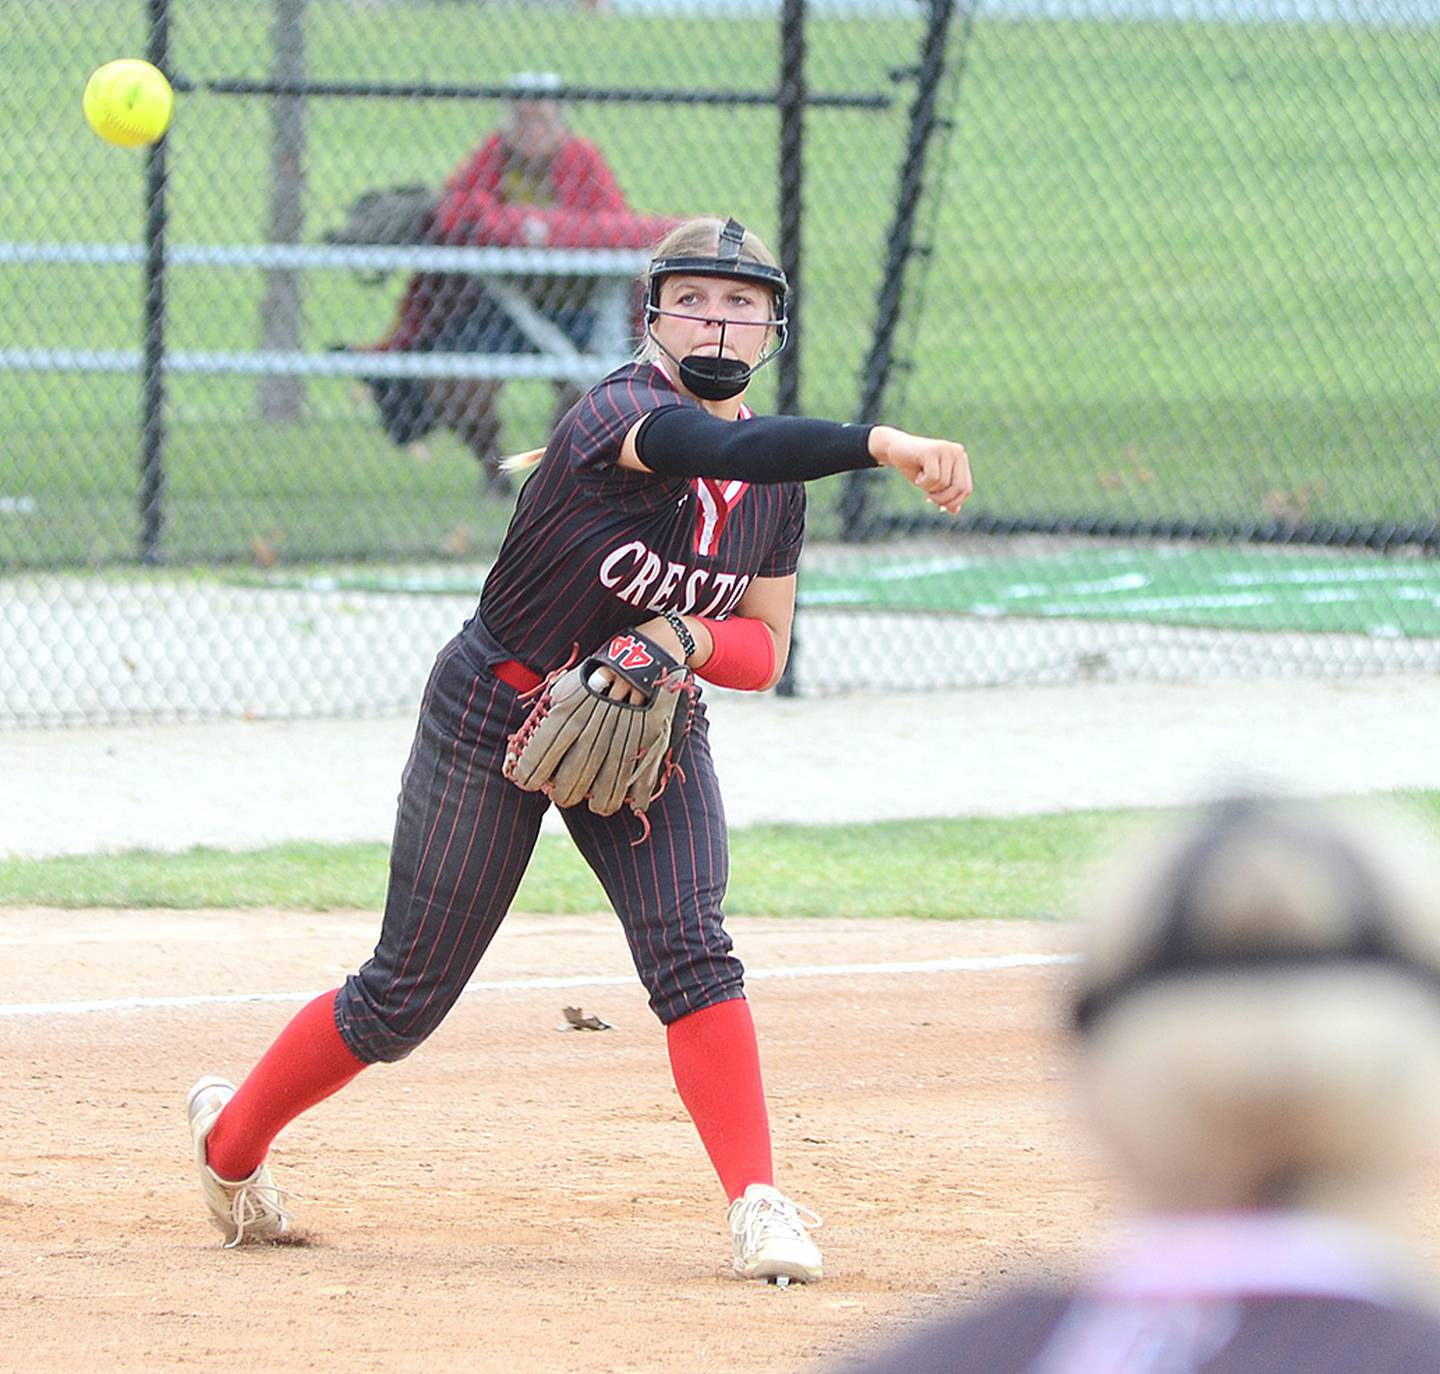 Creston third baseman Evy Marlin throws to first baseman Jaycee Hanson for an out during Saturday's loss to Dallas Center-Grimes. Marlin had two hits in the 6-5 win over Earlham later Saturday.